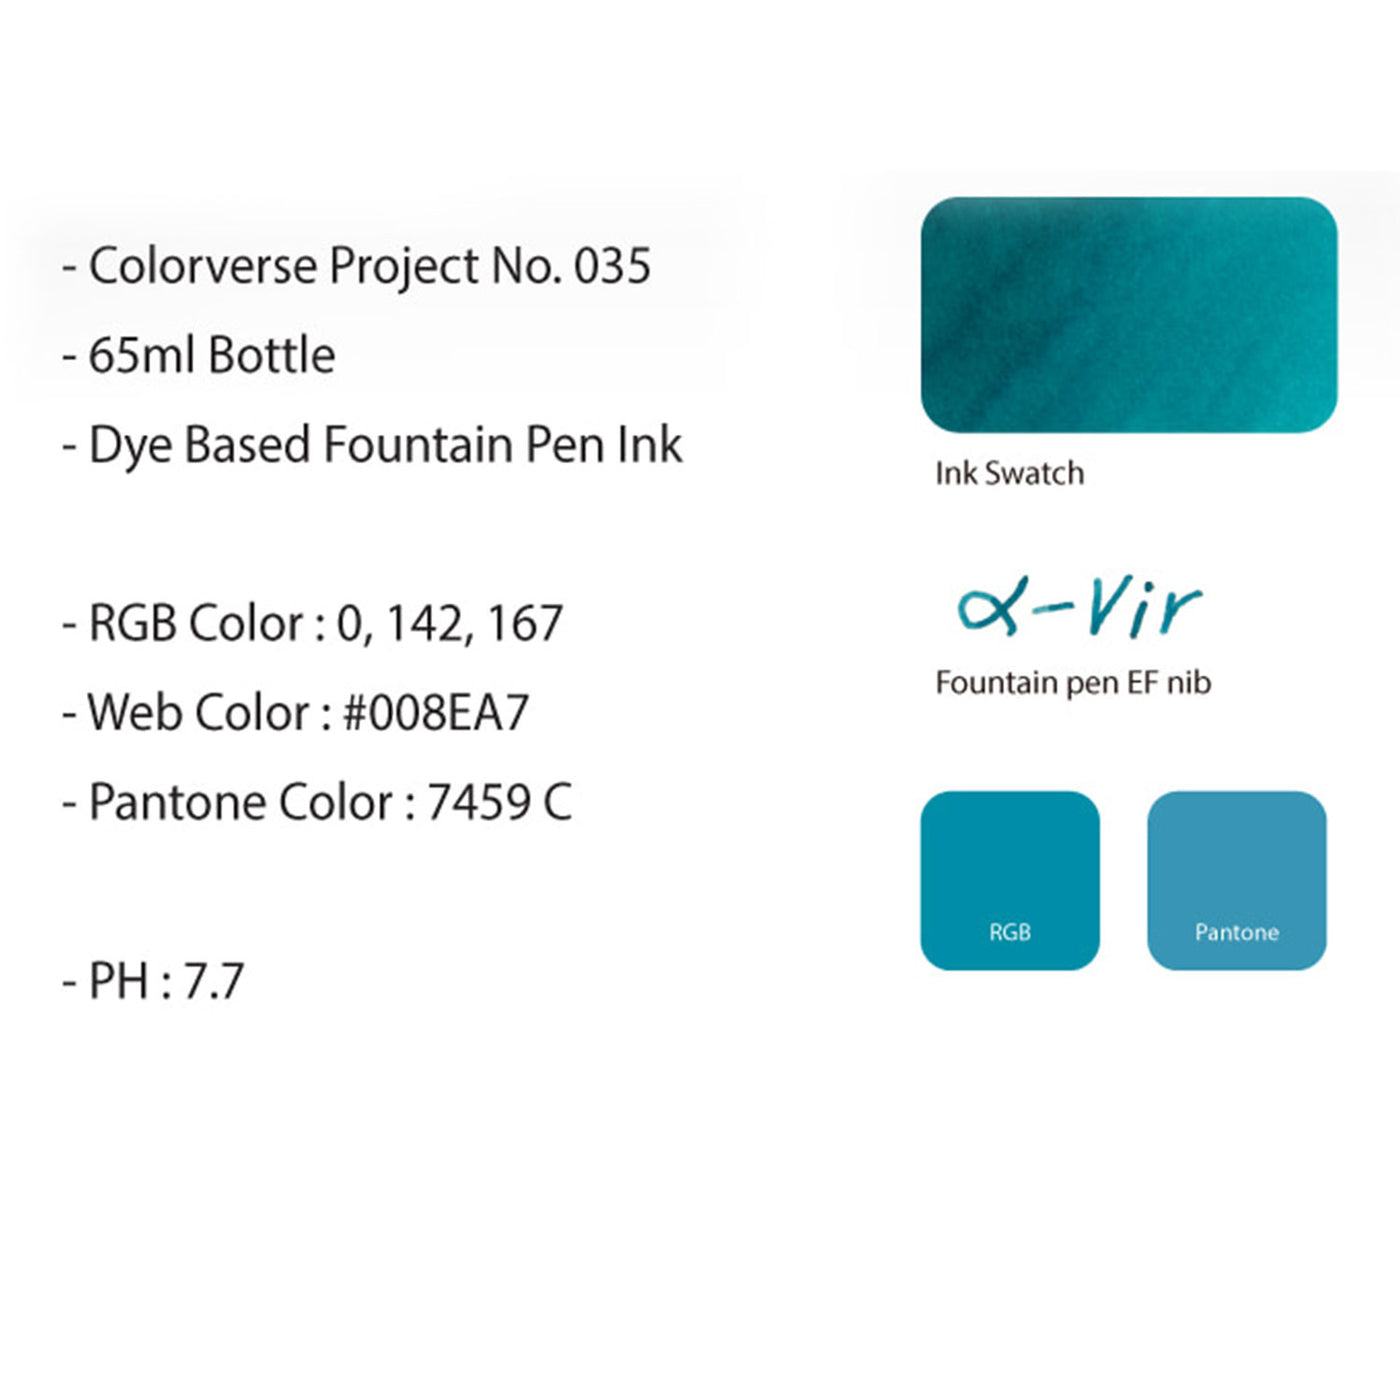 Colorverse Project Constellation II α Vir Ink Bottle Turquoise - 65ml 3